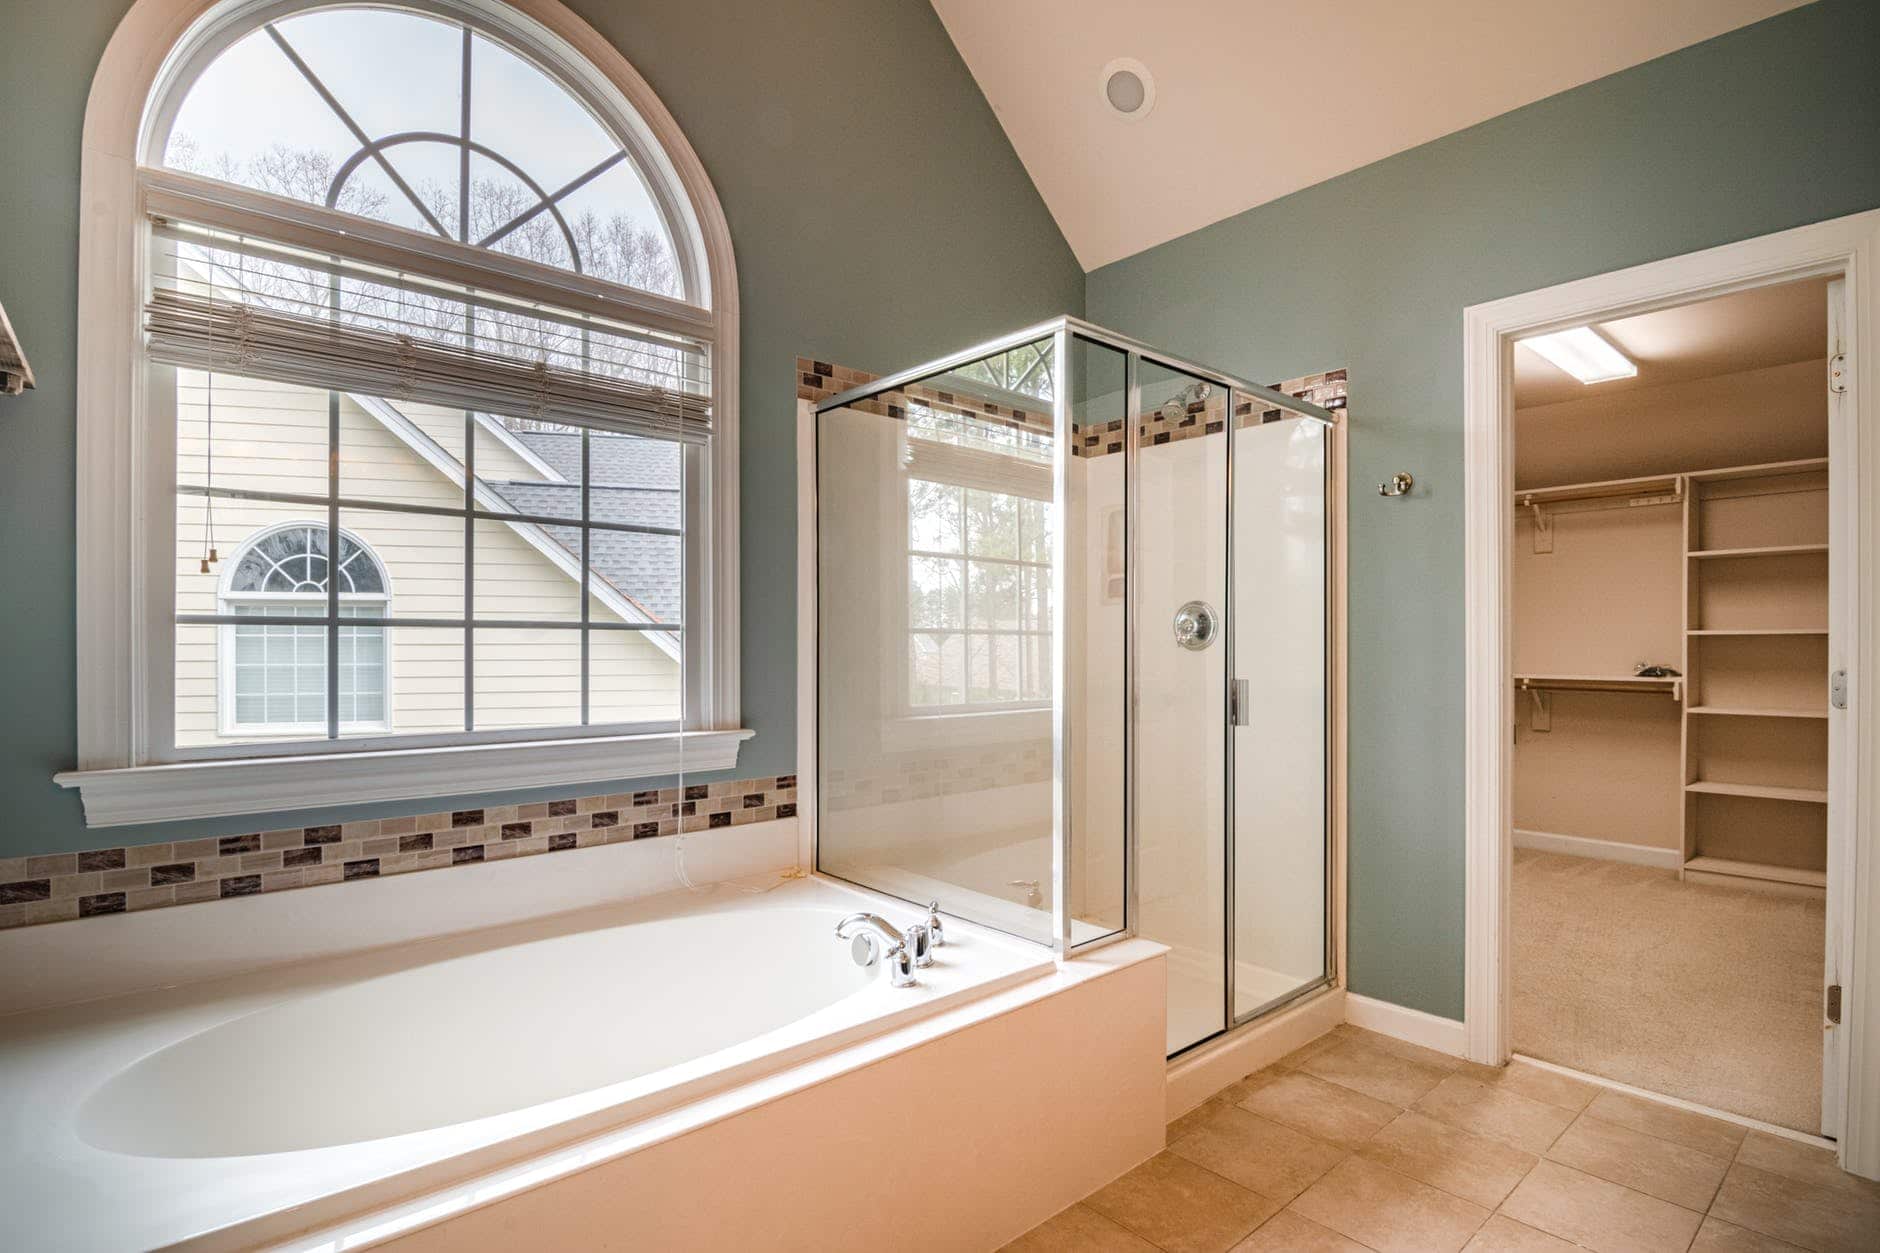 Bathroom Remodel Costs Experts Reveal the Ultimate Guide!